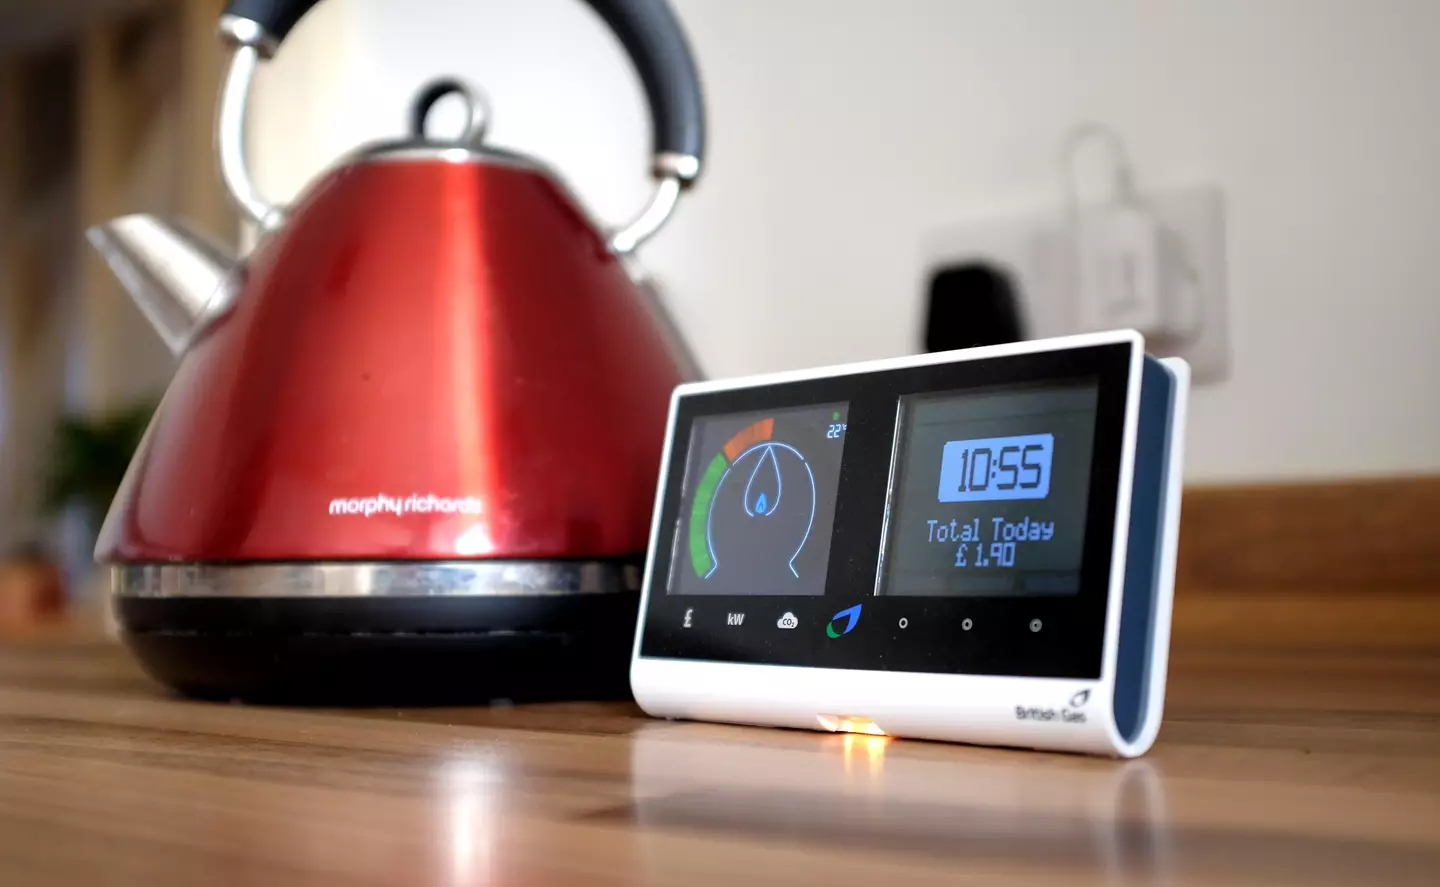 Energy bills in the UK are set to increase further.